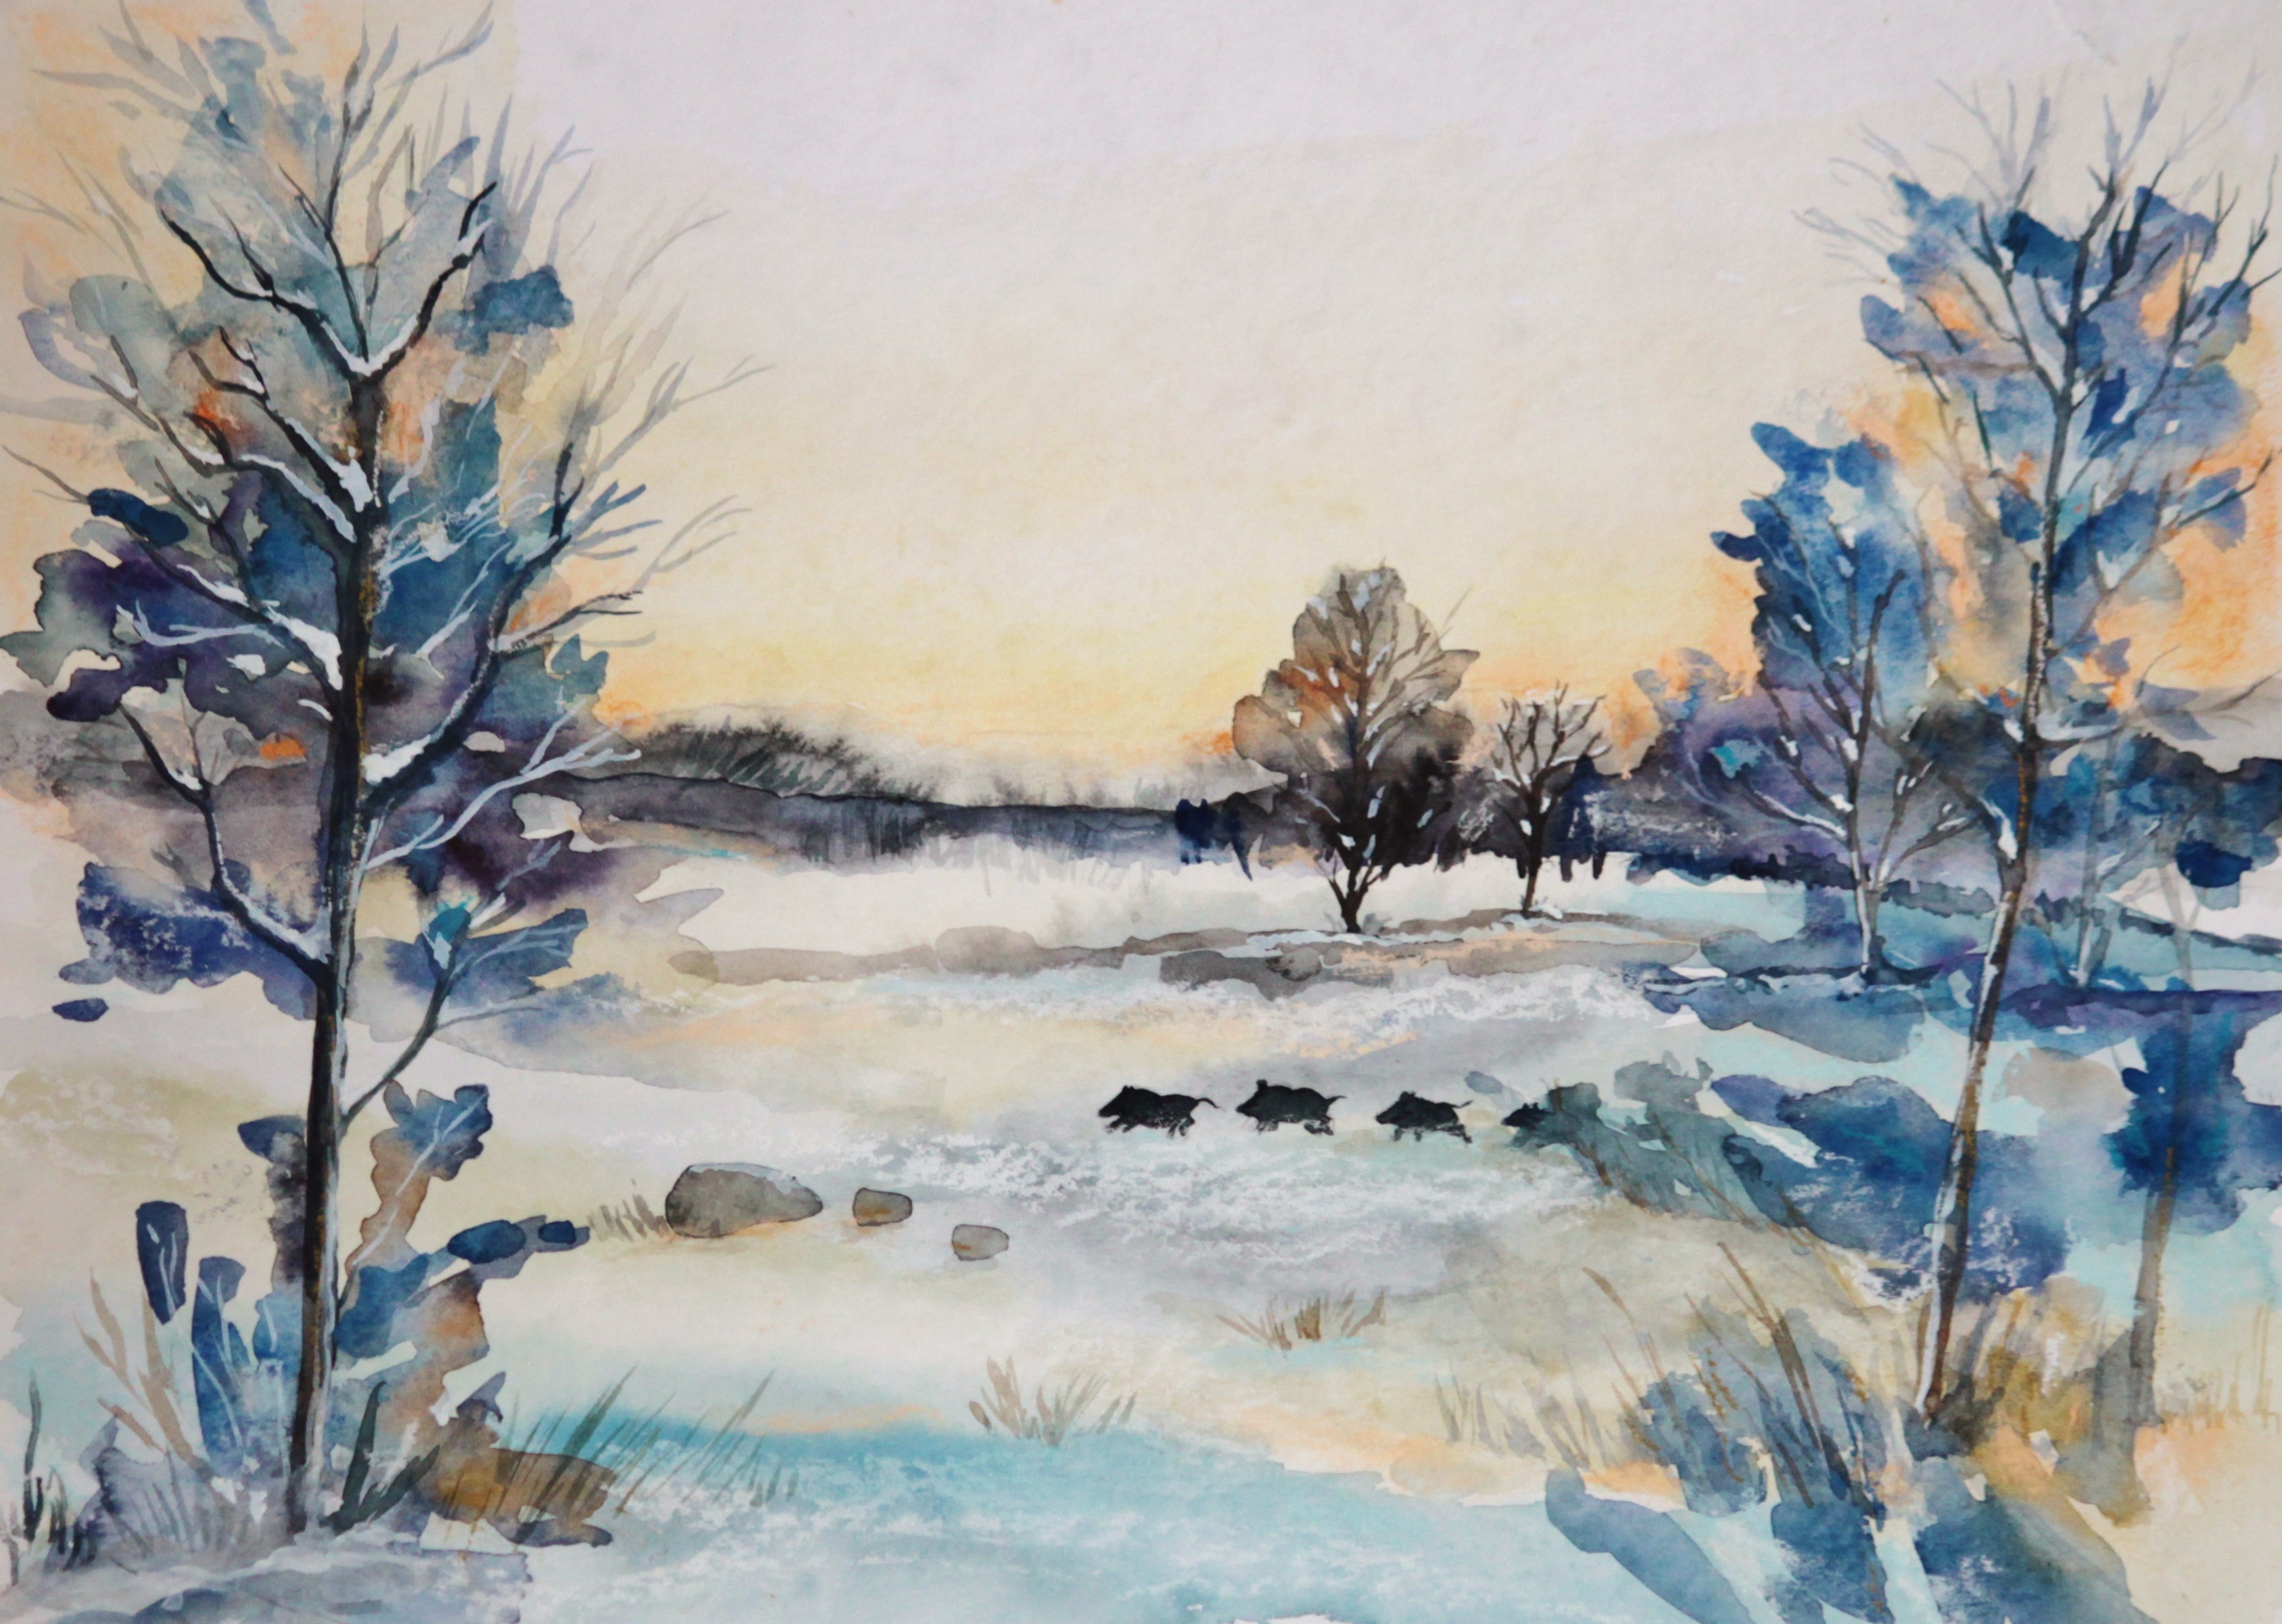 Watercolor Drawing Of A Winter Landscape Free Image